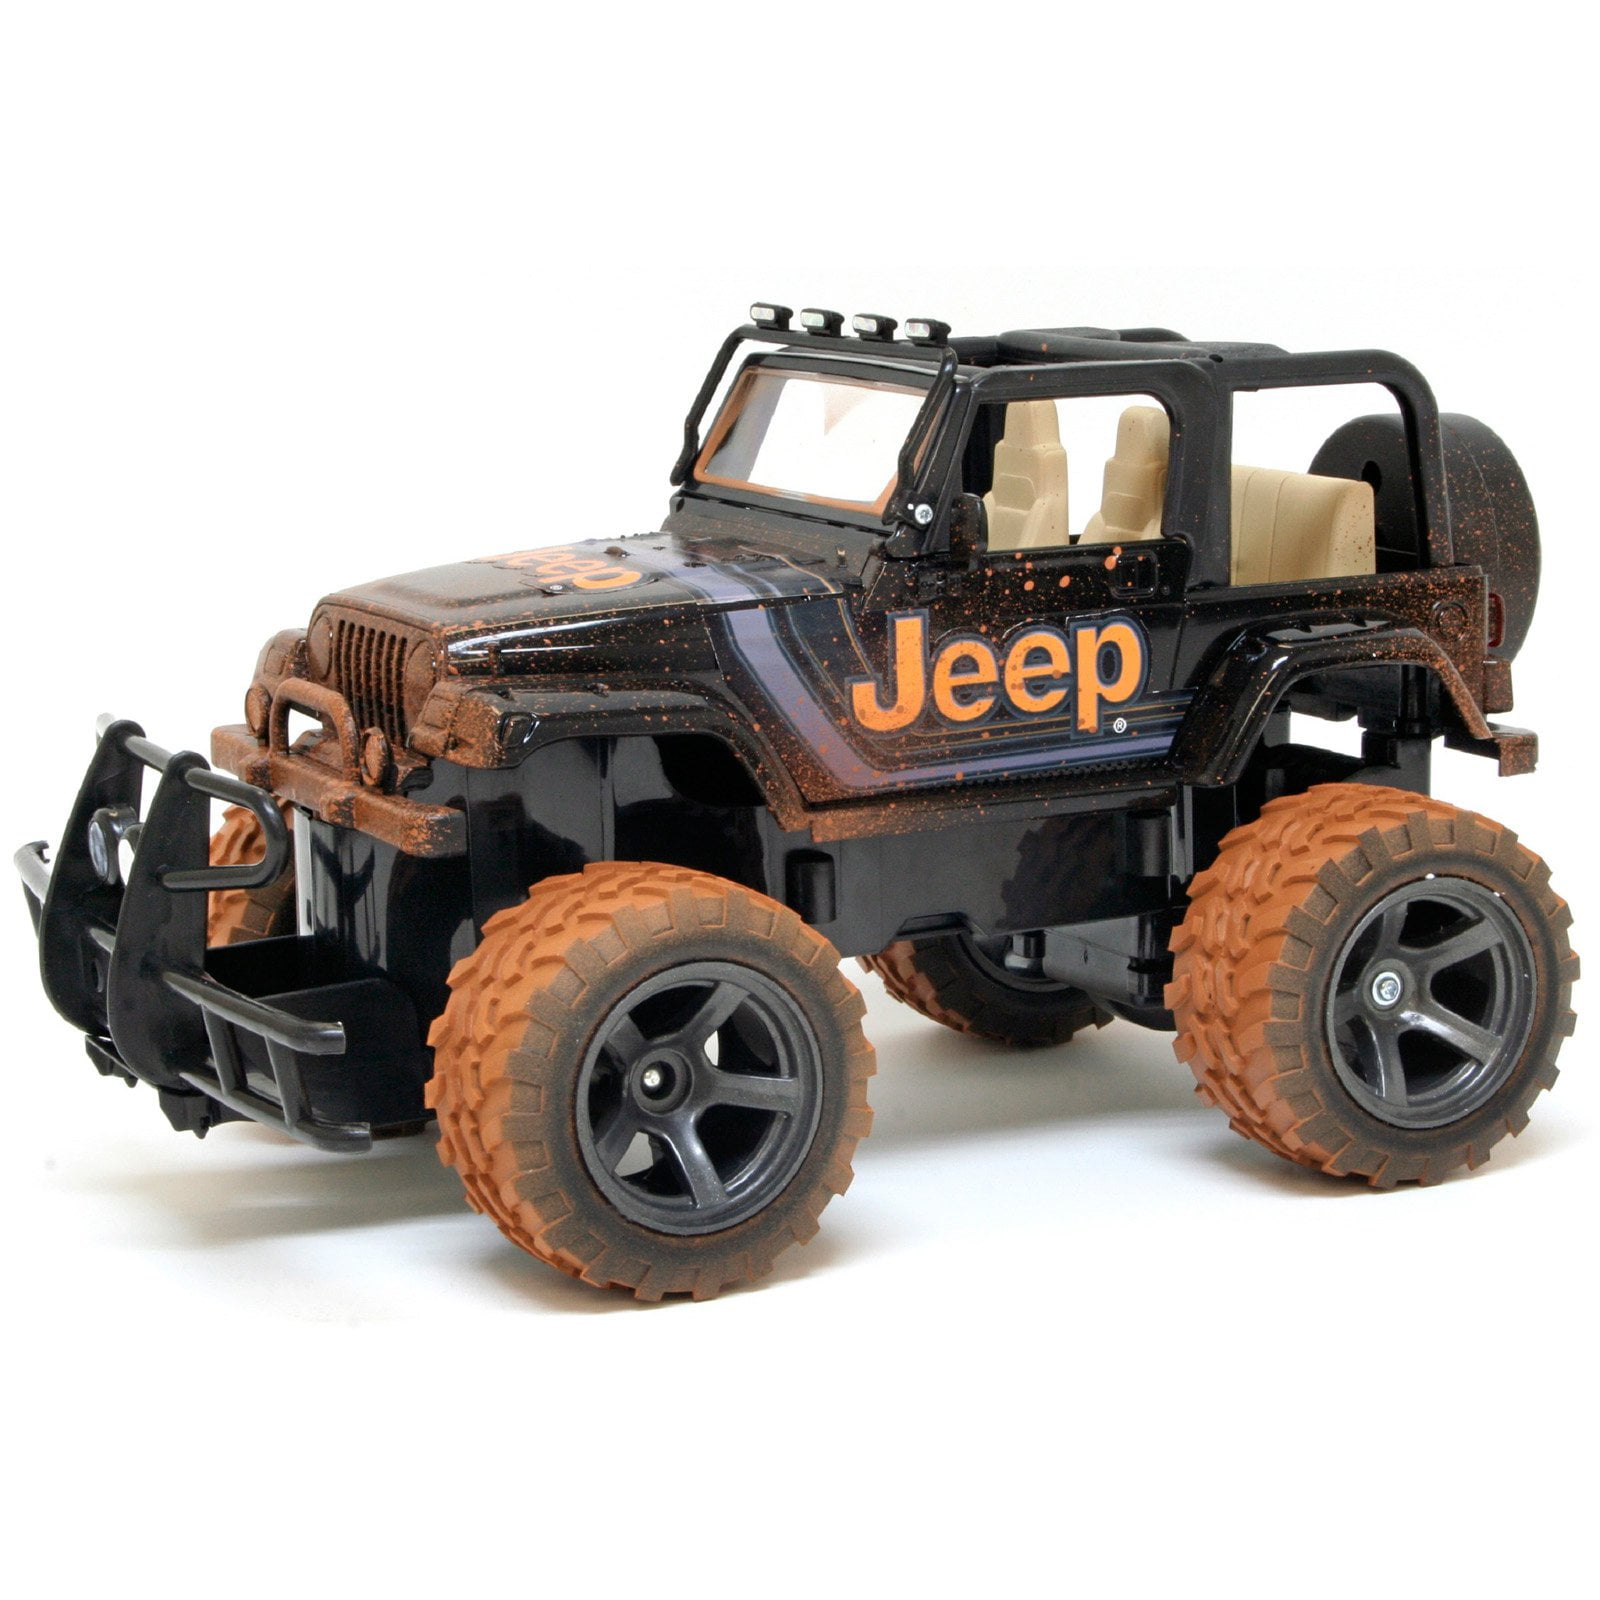 New Bright Mud Slingers Jeep Wrangler RC Vehicle Toy 